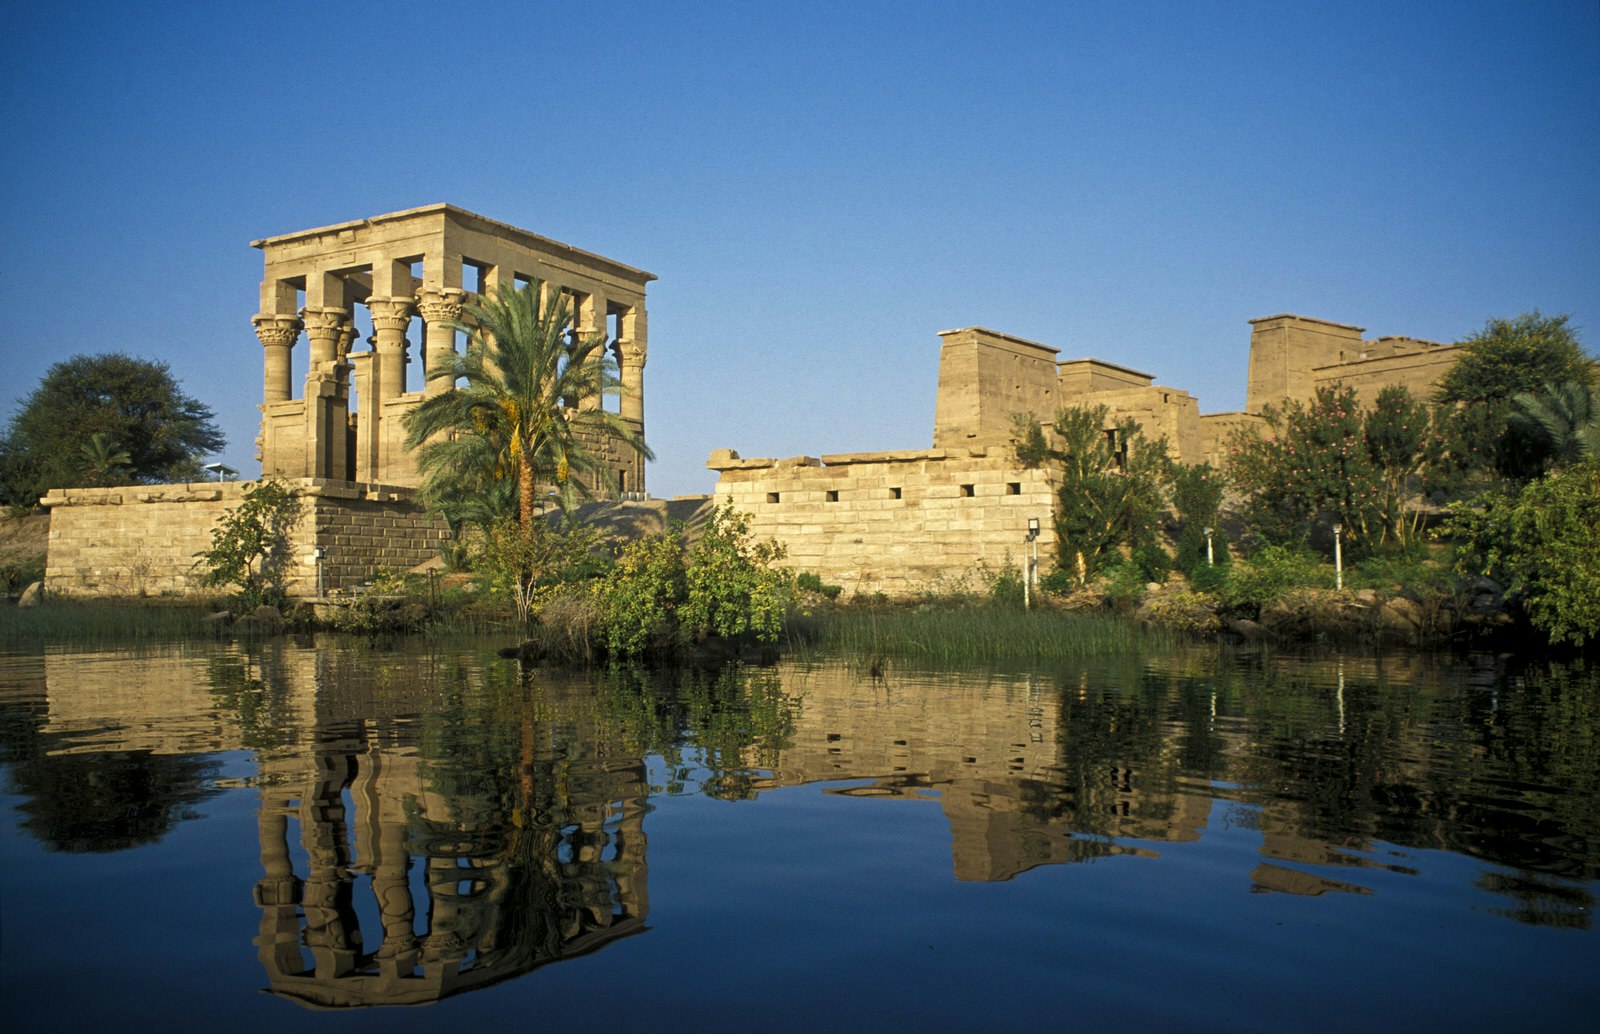 View from the water of the temple of Isis on Philae. Image by Steve Duchesne / Getty Images